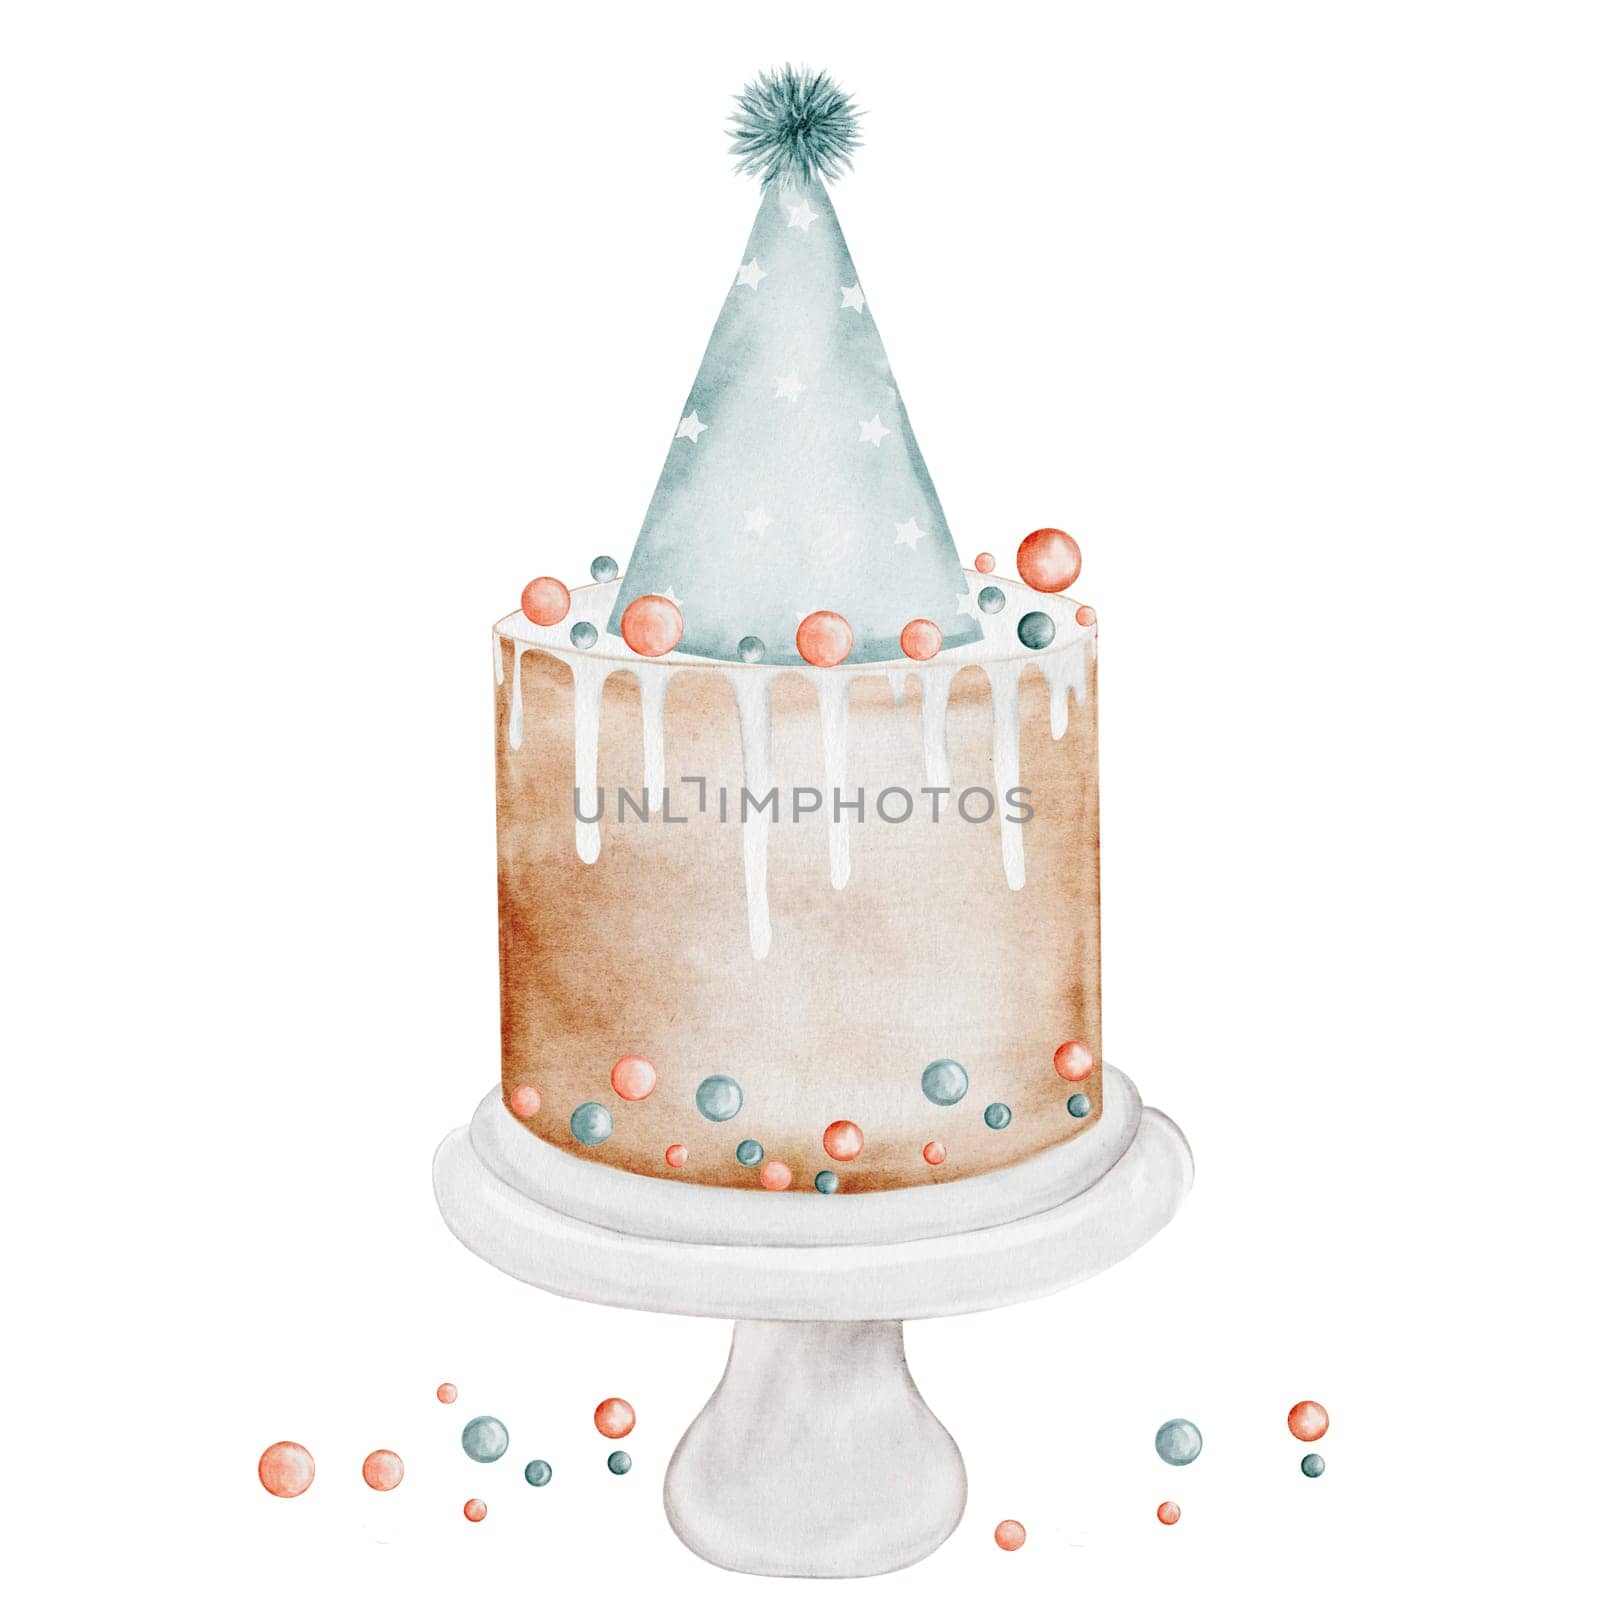 Birthday cake watercolor. Watercolor vintage illustration of a holiday pie. Clip art isolated on white background sweet pastries. Ideal for designing baby shower and birthday cards and invitations. High quality photo